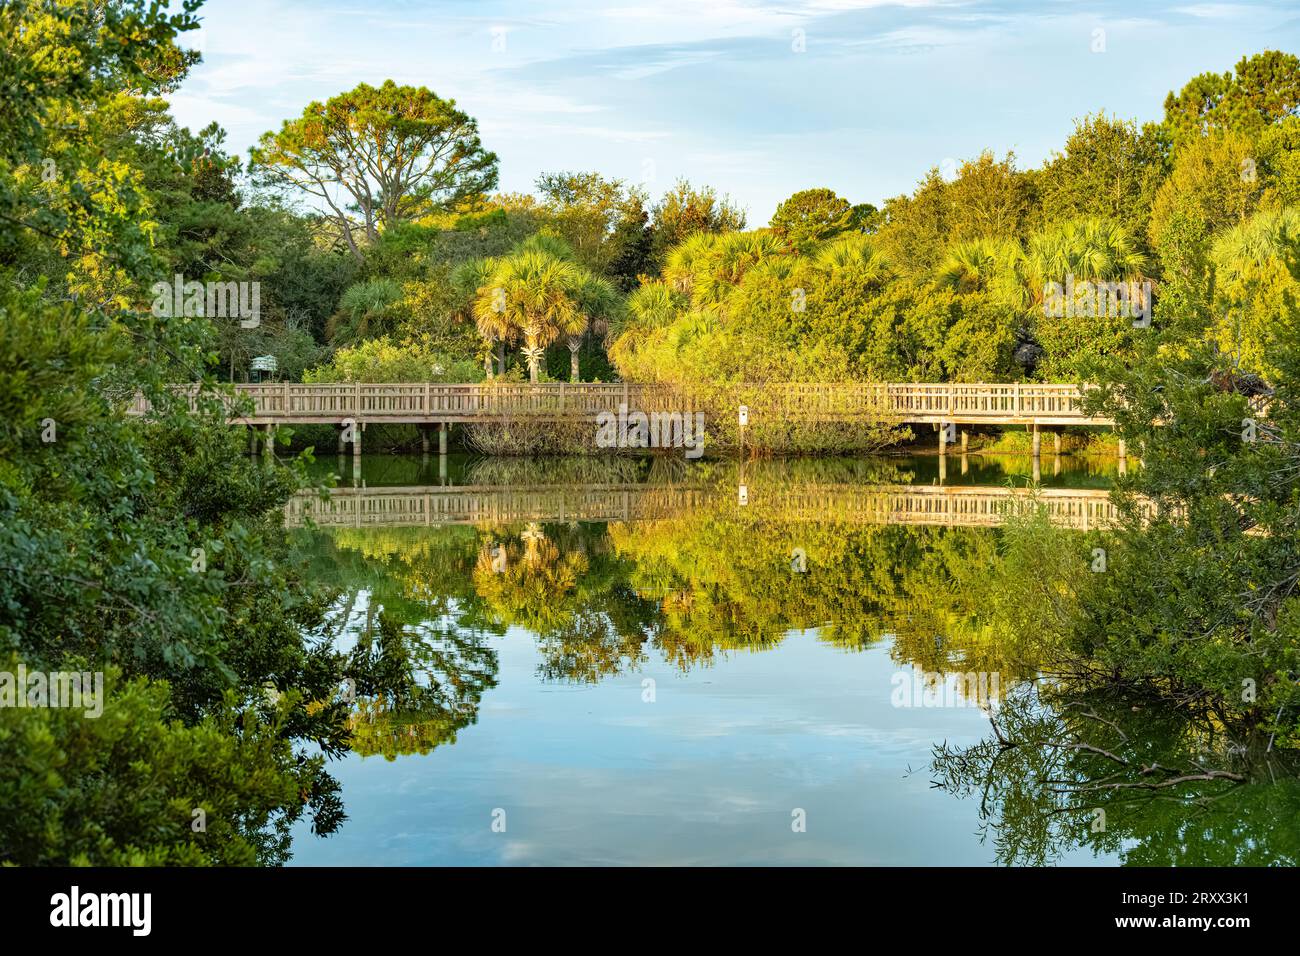 Sunrise view of the lakeside boardwalk with various birdhouses at Bird Island Park in Ponte Vedra Beach, Florida. (USA) Stock Photo